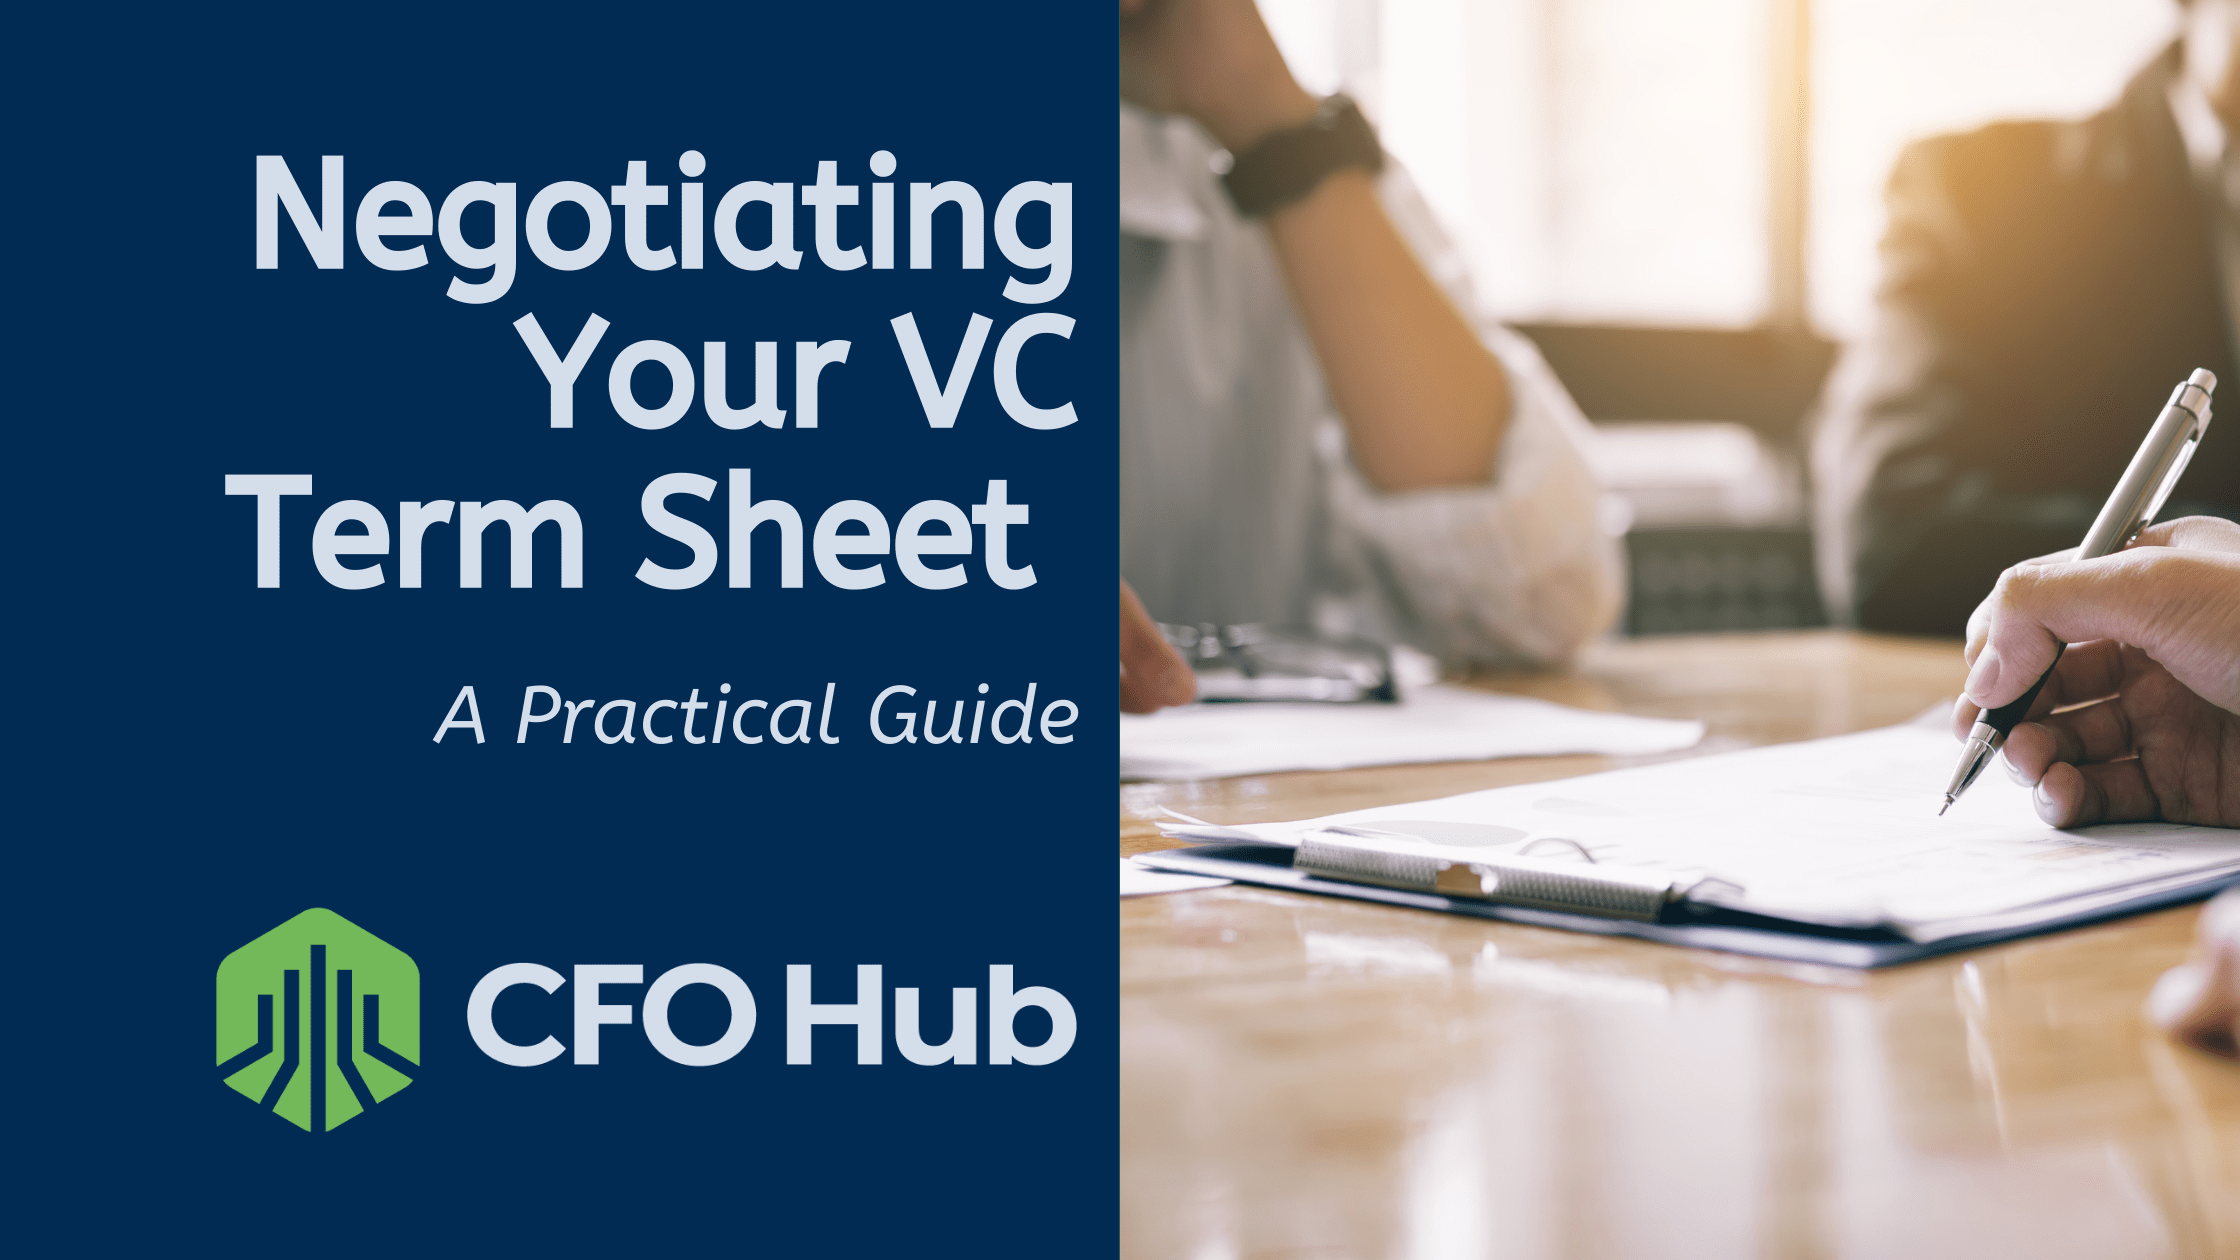 A Practical Guide to Negotiating Your VC Term Sheet